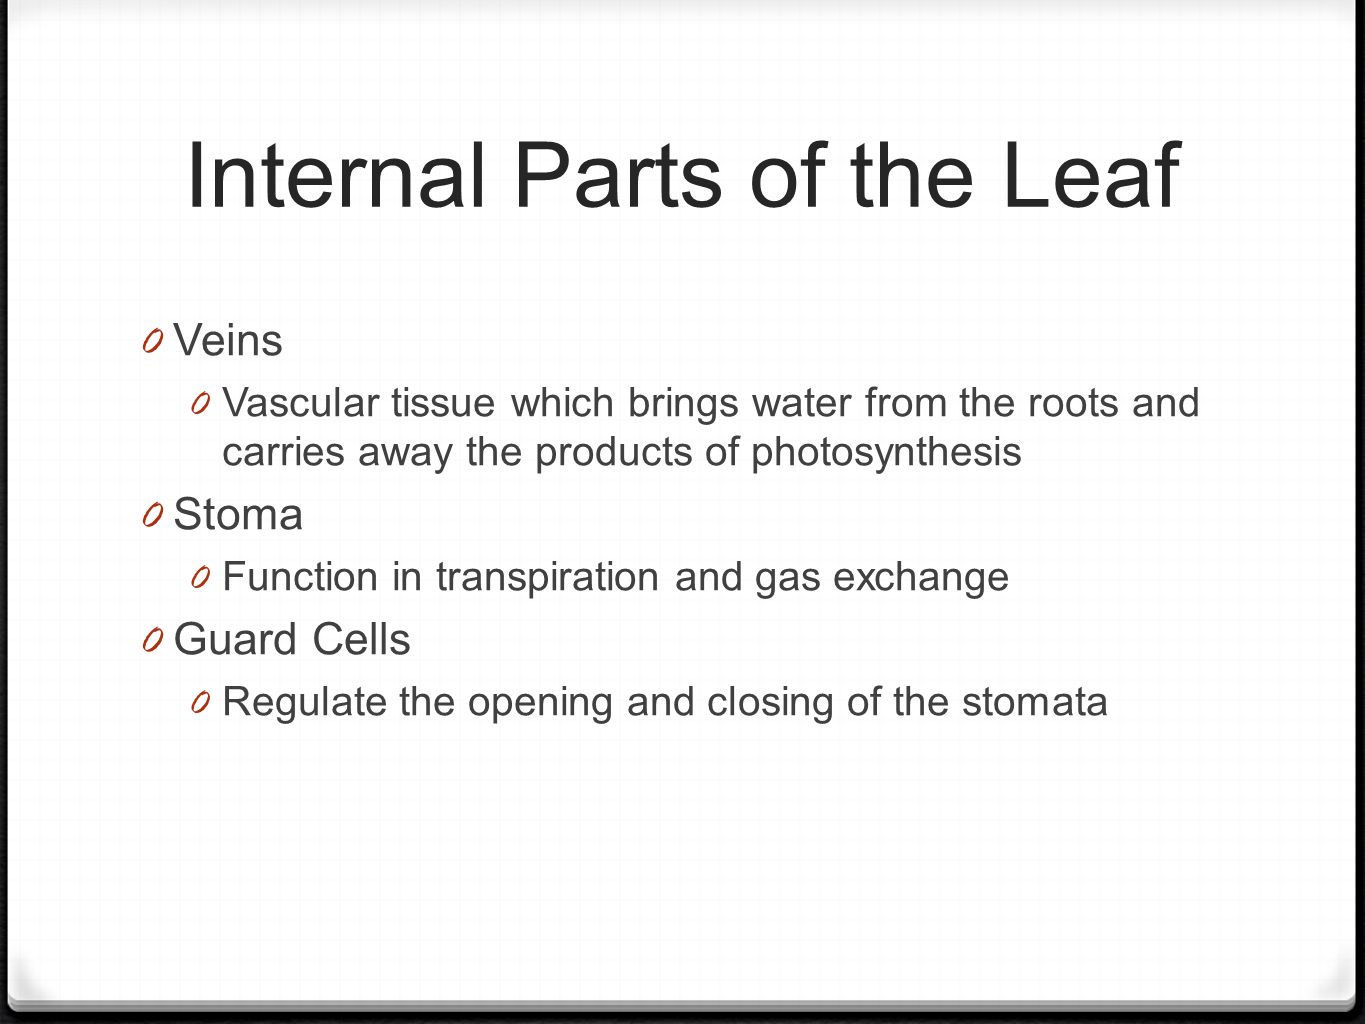 Internal Parts of the Leaf 0 Veins 0 Vascular tissue which brings water from the roots and carries away the products of photosynthesis 0 Stoma 0 Function in transpiration and gas exchange 0 Guard Cells 0 Regulate the opening and closing of the stomata